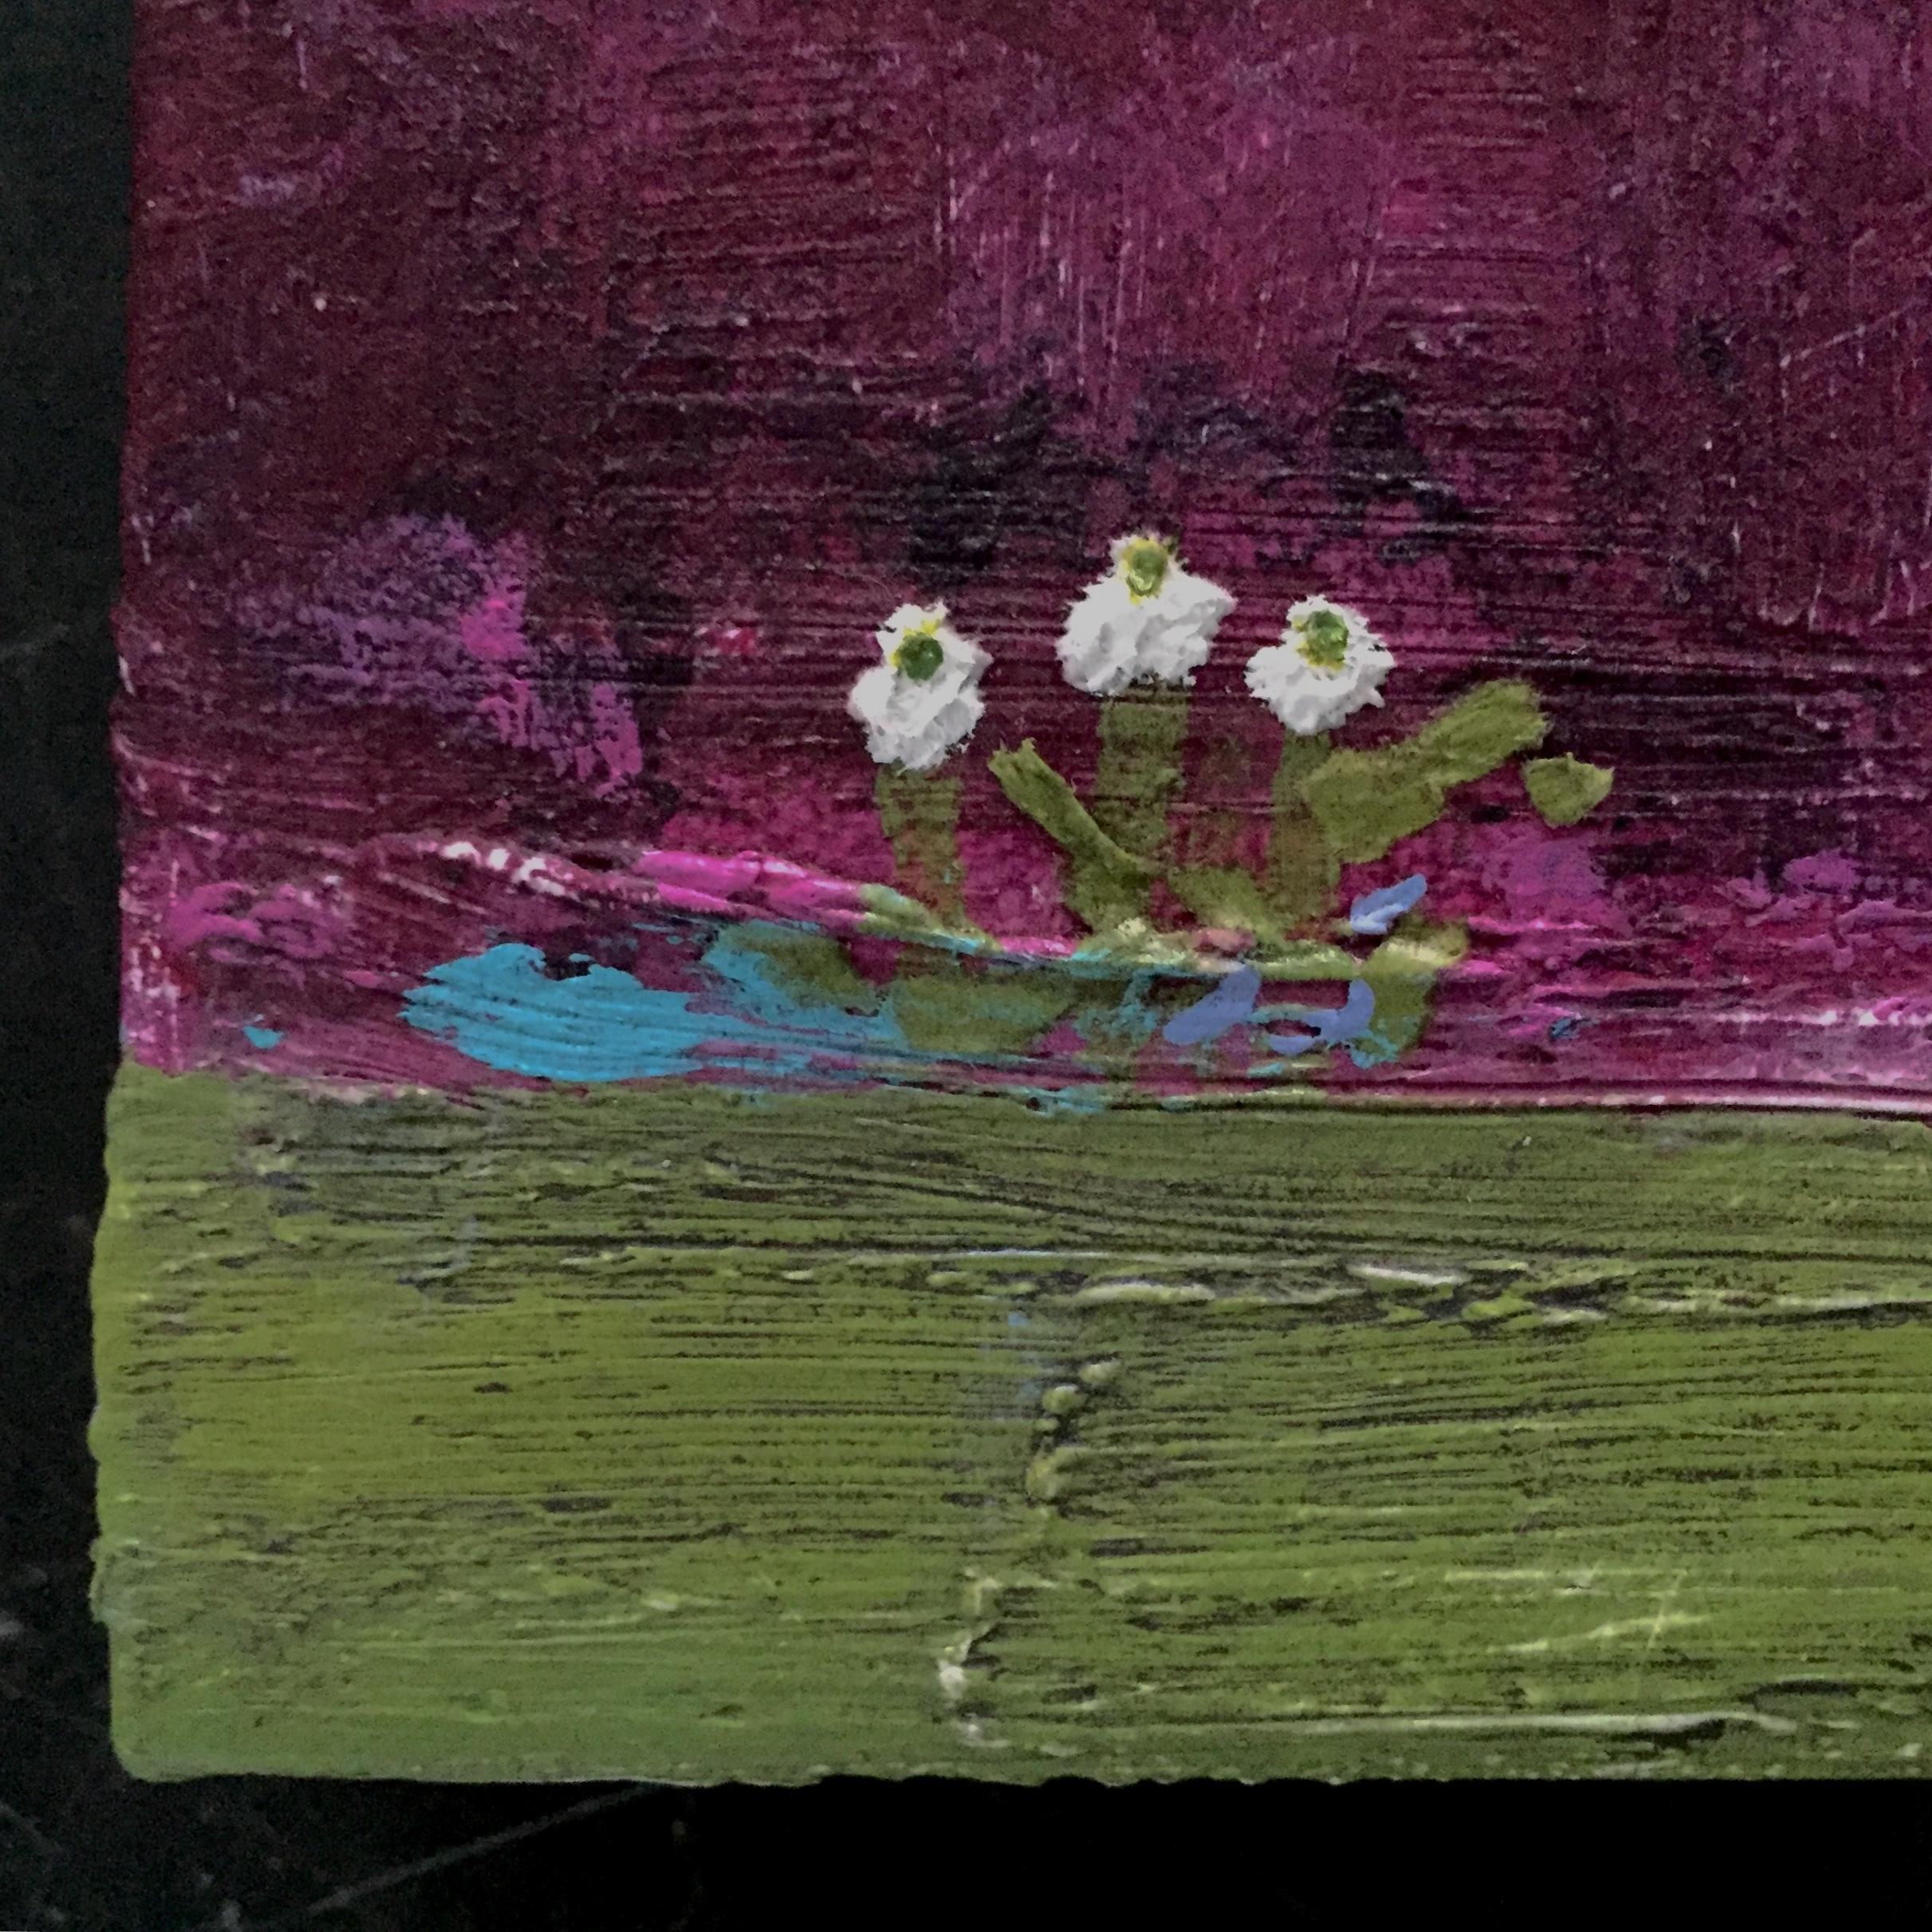 Small paintings make a big statement. In this delicate piece, multi layers of paint build up a textured, impressionistic landscape with the focus on strong composition. Tiny white flowers pop from a vibrant background of intense colour creating